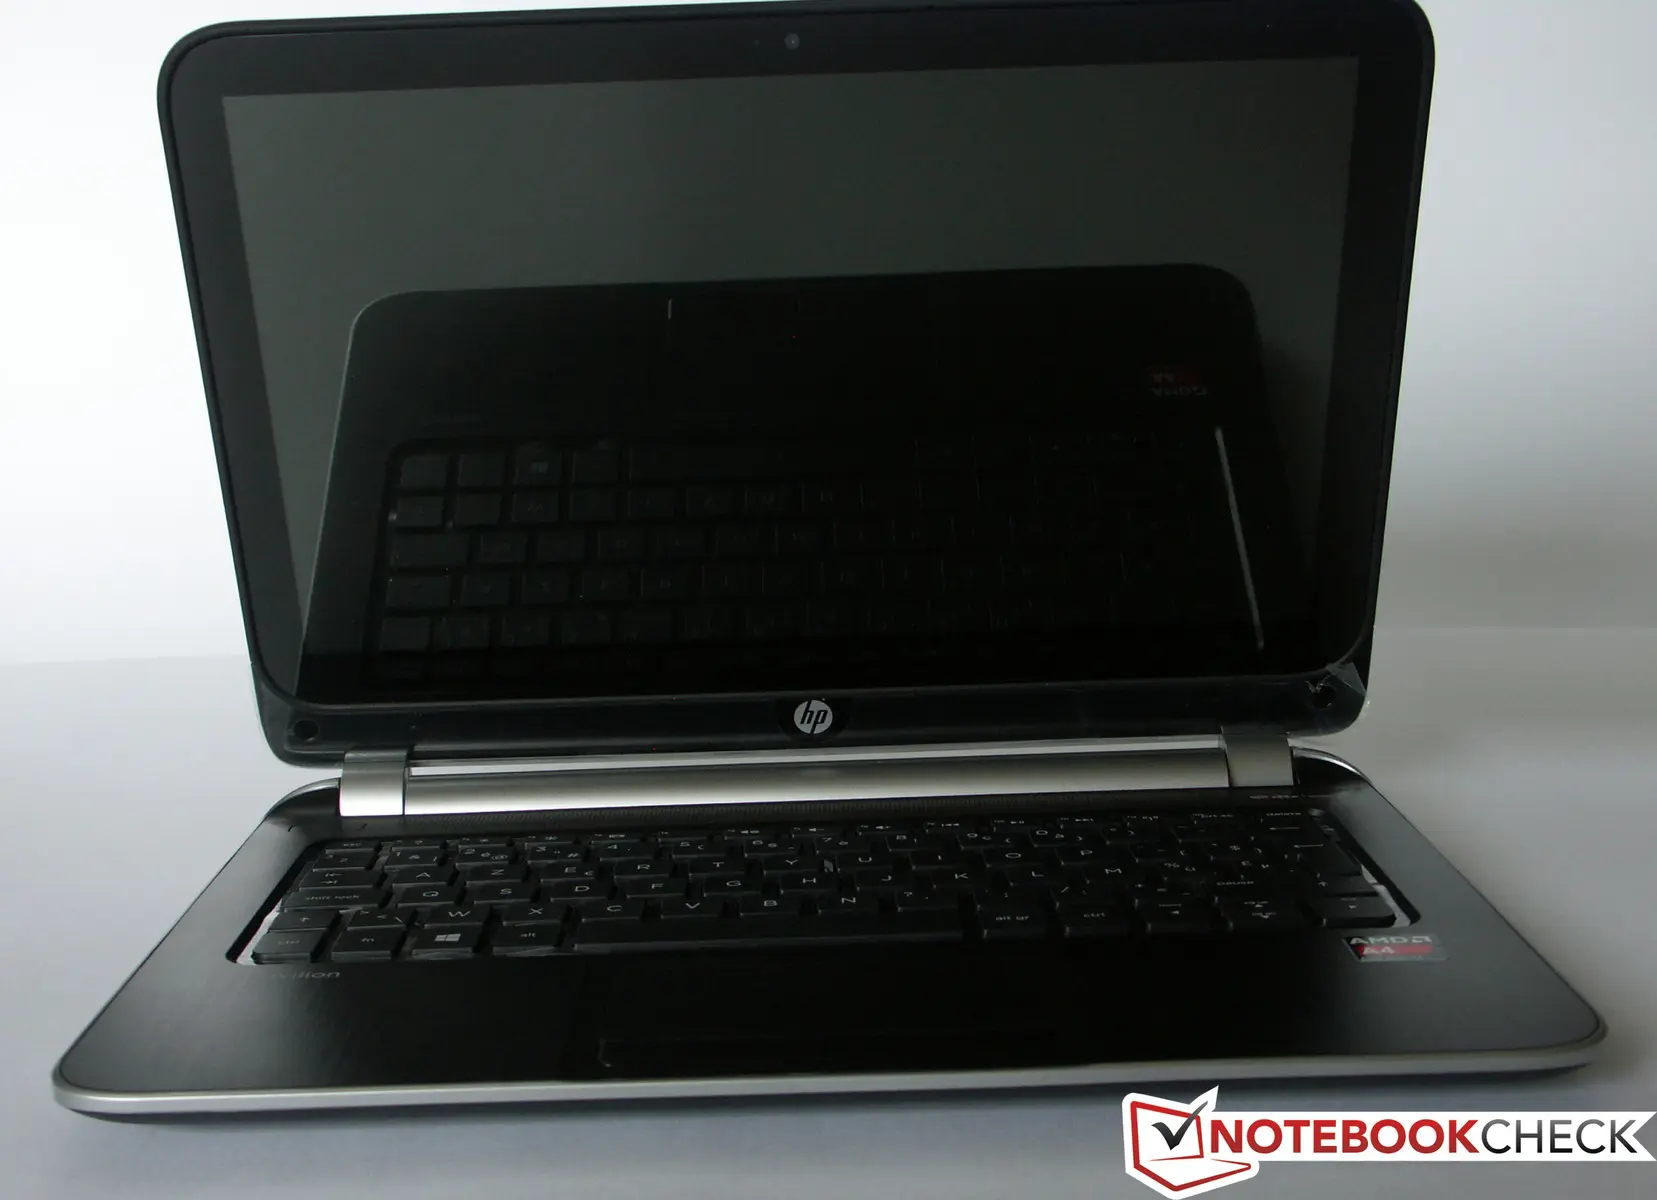 hewlett packard hp pavilion ts 11 notebook pc driver - What is the price of HP Pavilion TS 11 laptop